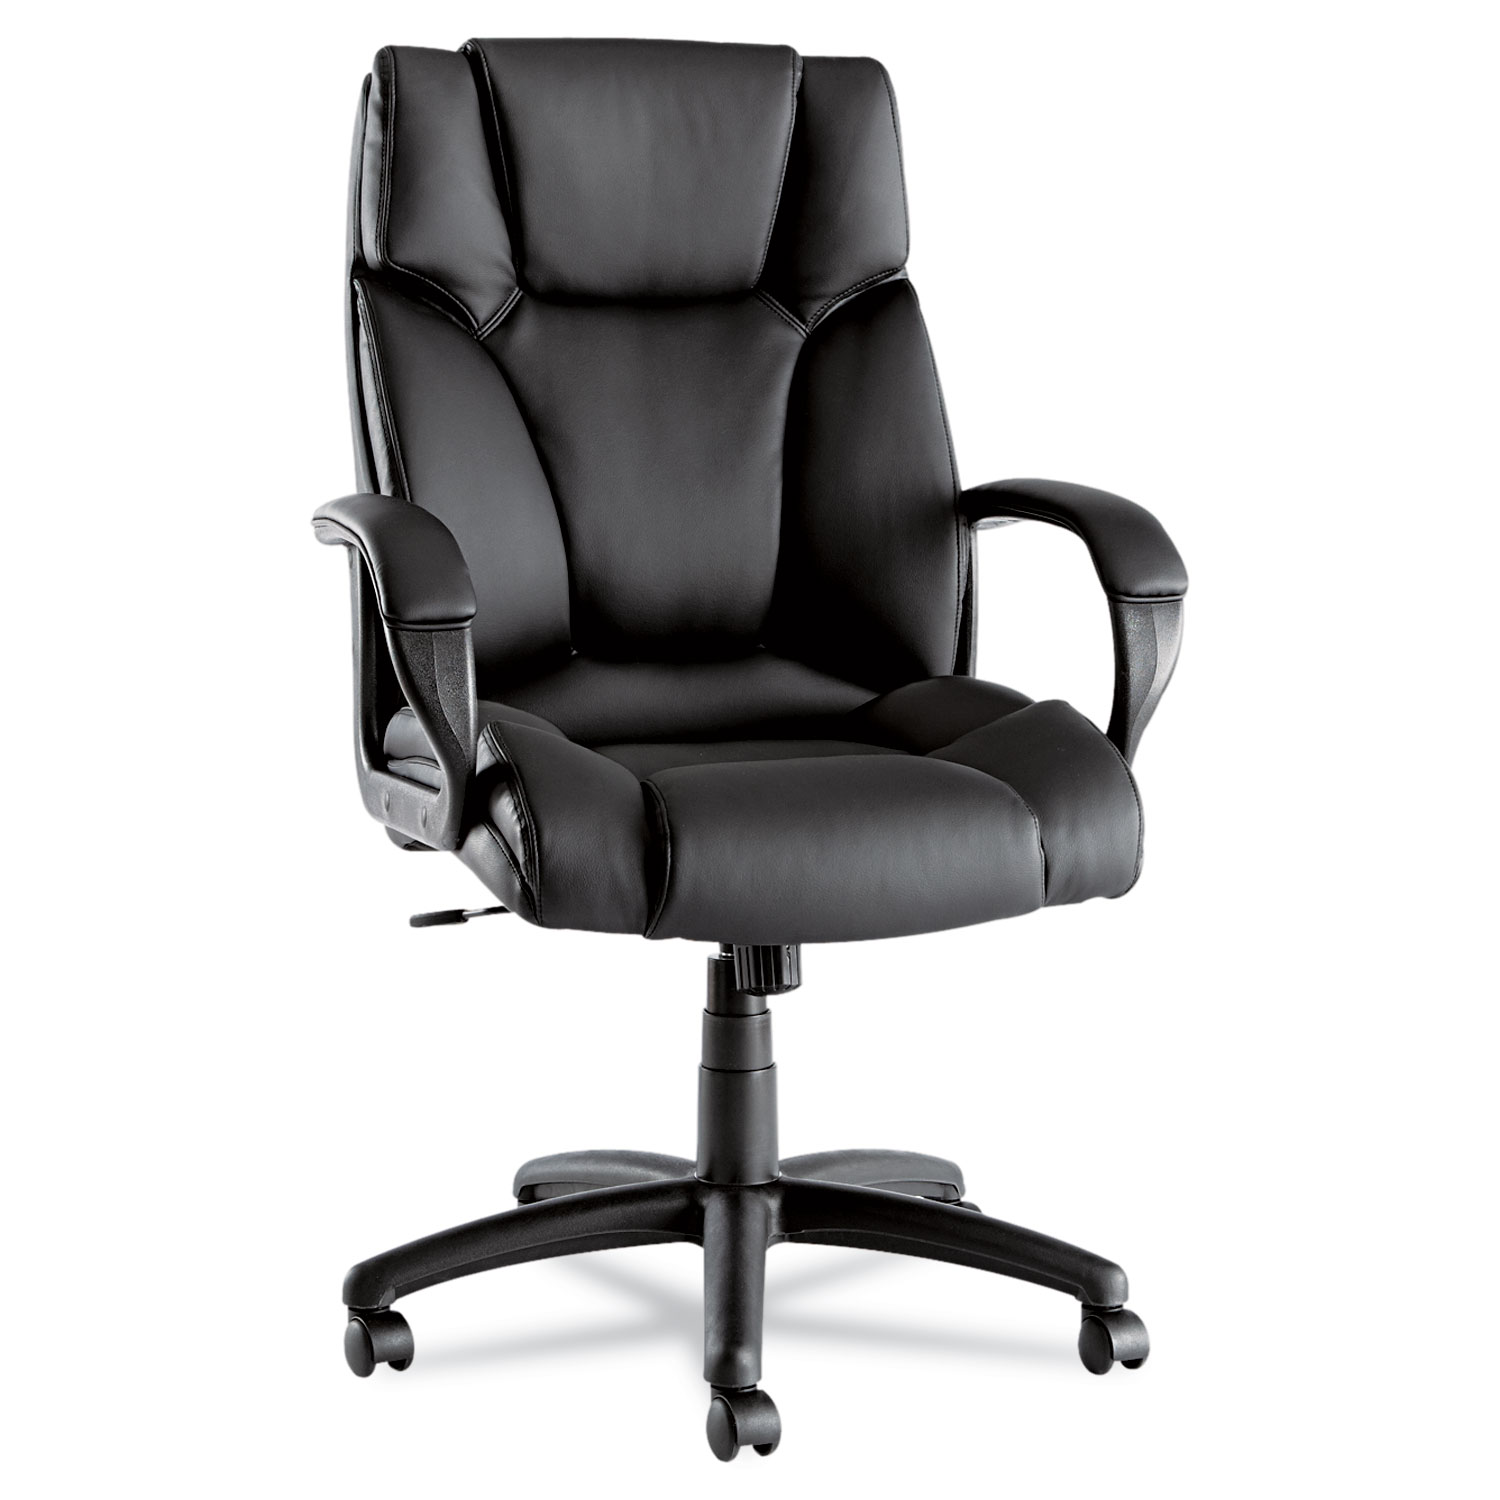  Alera ALEFZ41LS10B Alera Fraze Executive High-Back Swivel/Tilt Leather Chair, Supports up to 275 lbs., Black Seat/Black Back, Black Base (ALEFZ41LS10B) 